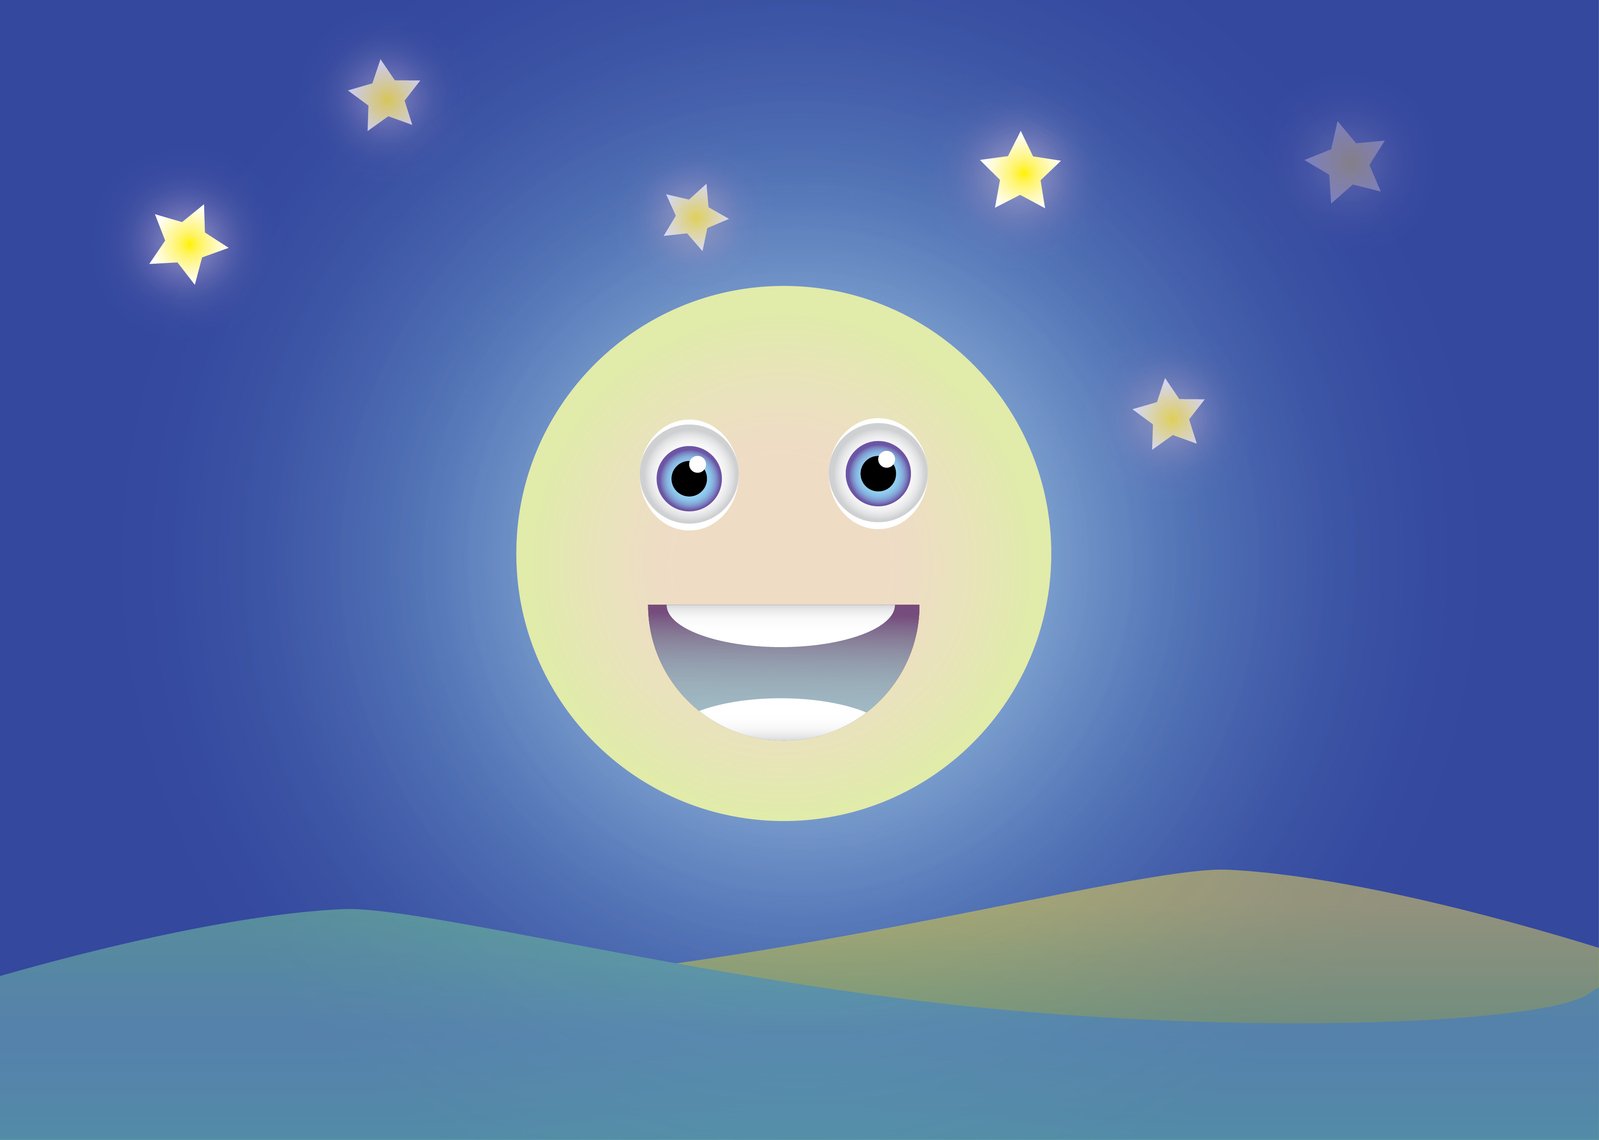 a cartooned face appears to be surrounded by stars